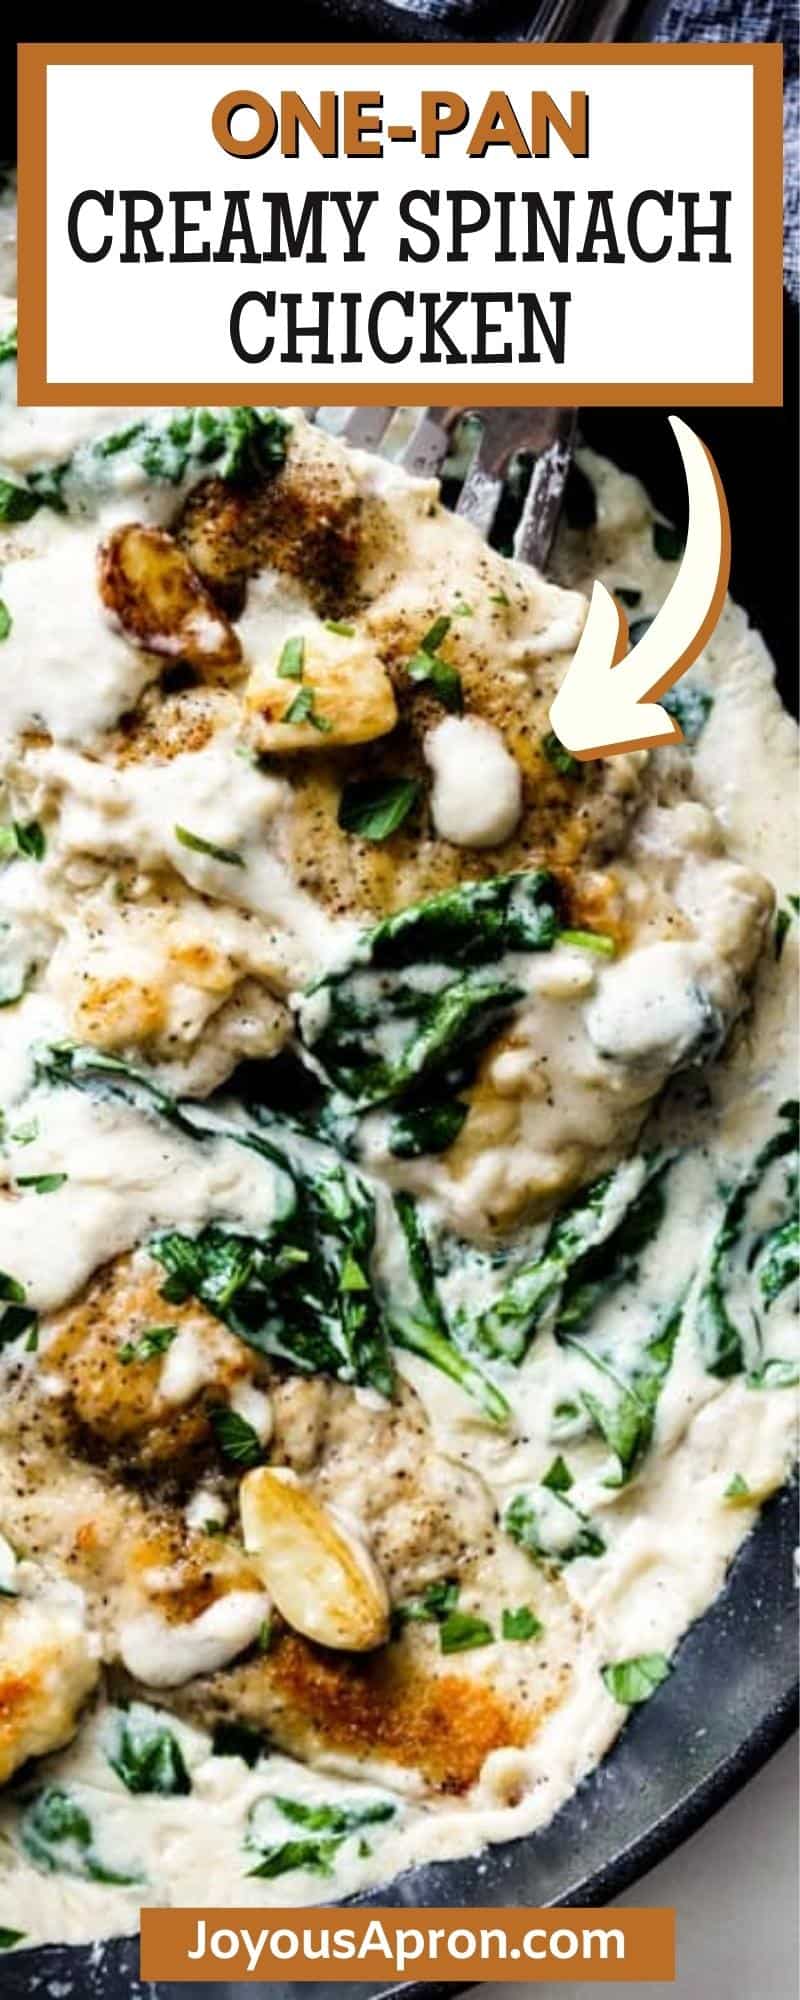 Creamy Spinach Chicken - An easy one-pan skillet chicken recipe for a quick dinner meal! Crispy seasoned chicken coated in creamy garlic spinach sauce. via @joyousapron